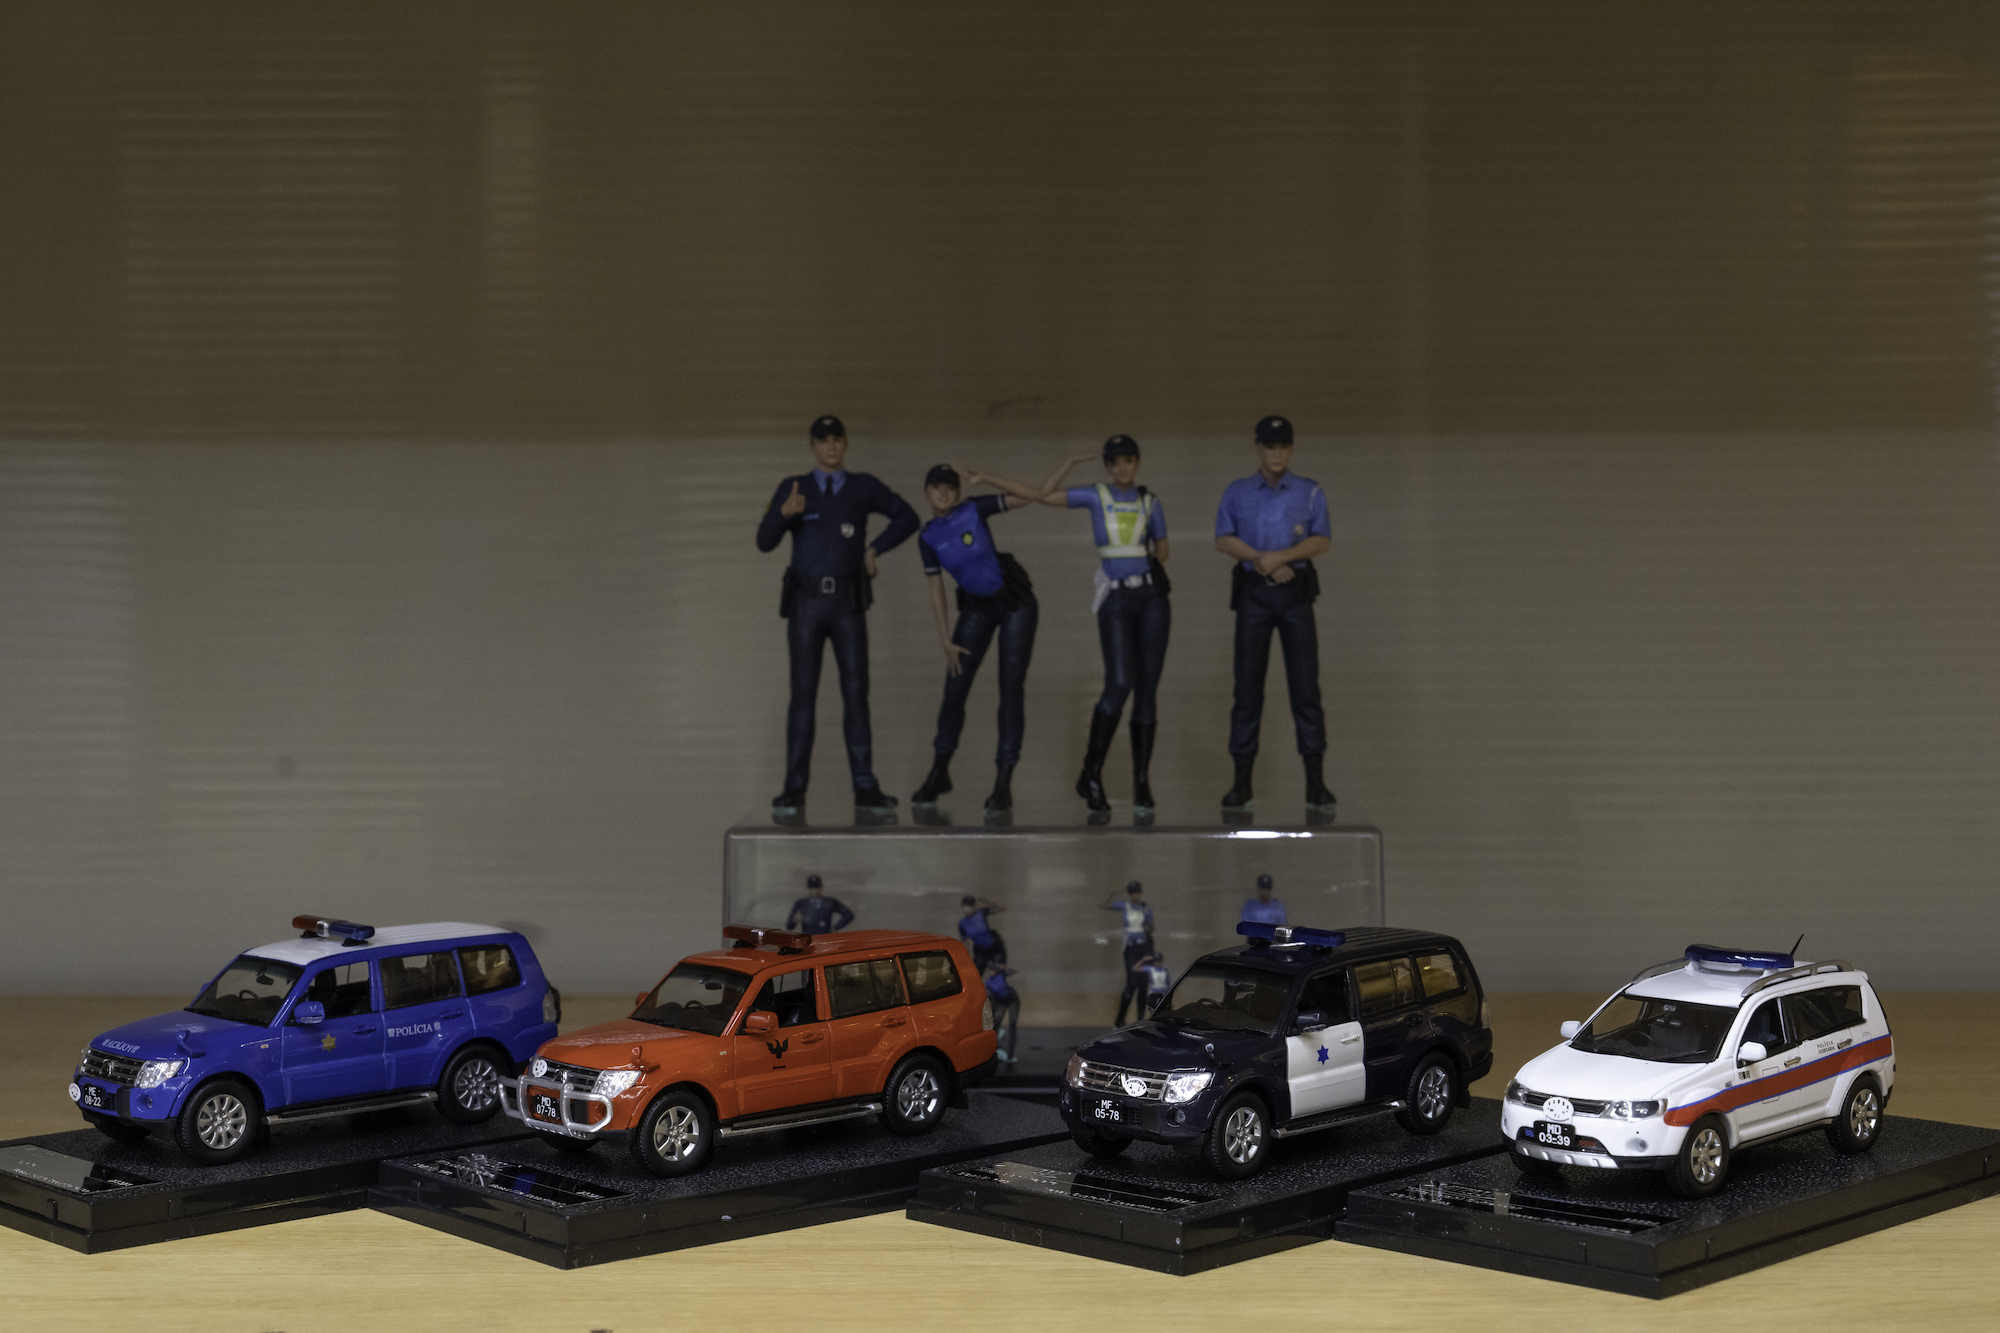 The newly launched Macau Security Force series includes the different Mitsubishi models used by the force, as well as model Macao police officers